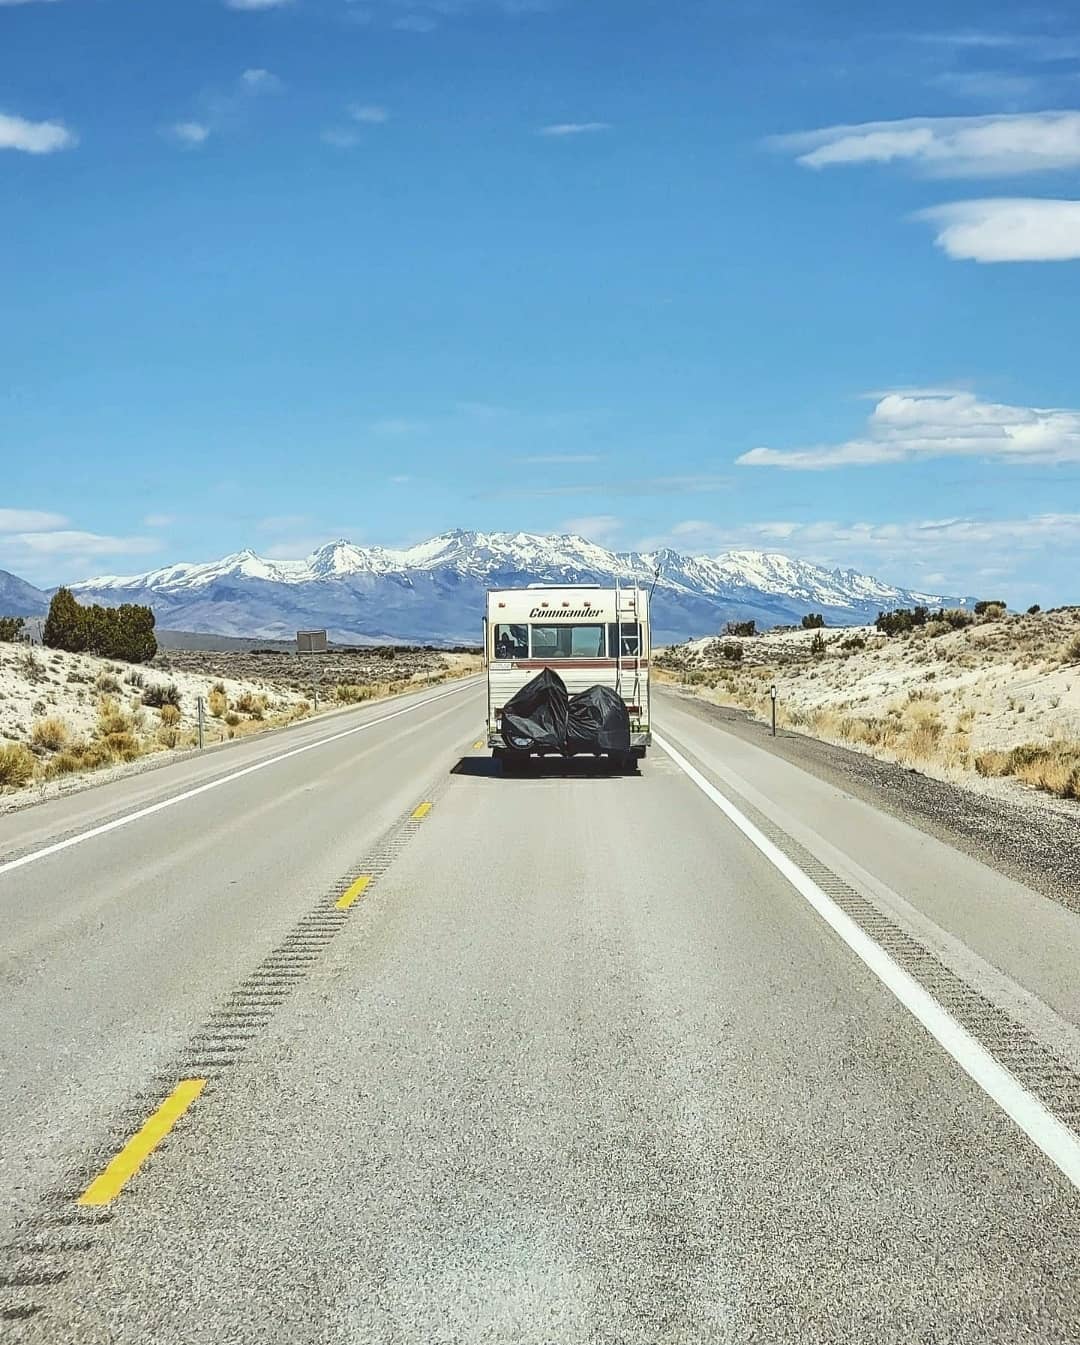 RV on the road with mountains in the background. Photo by Instagram user @a.girl.and.her.commander